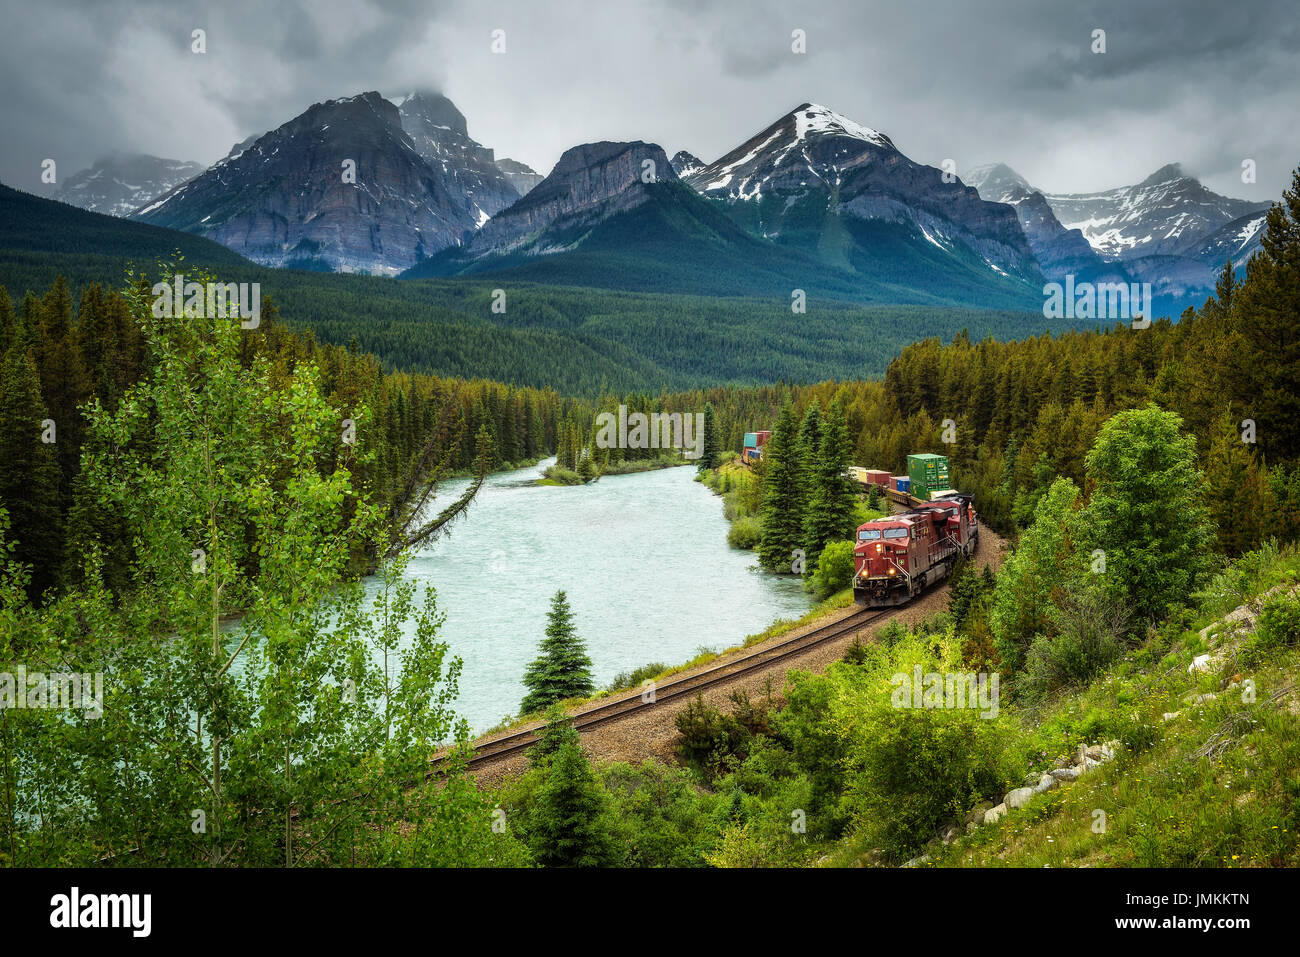 Train passing through the Morant's Curve in bow valley with Rocky Mountains in the background, Banff National Park, Alberta Canada Stock Photo